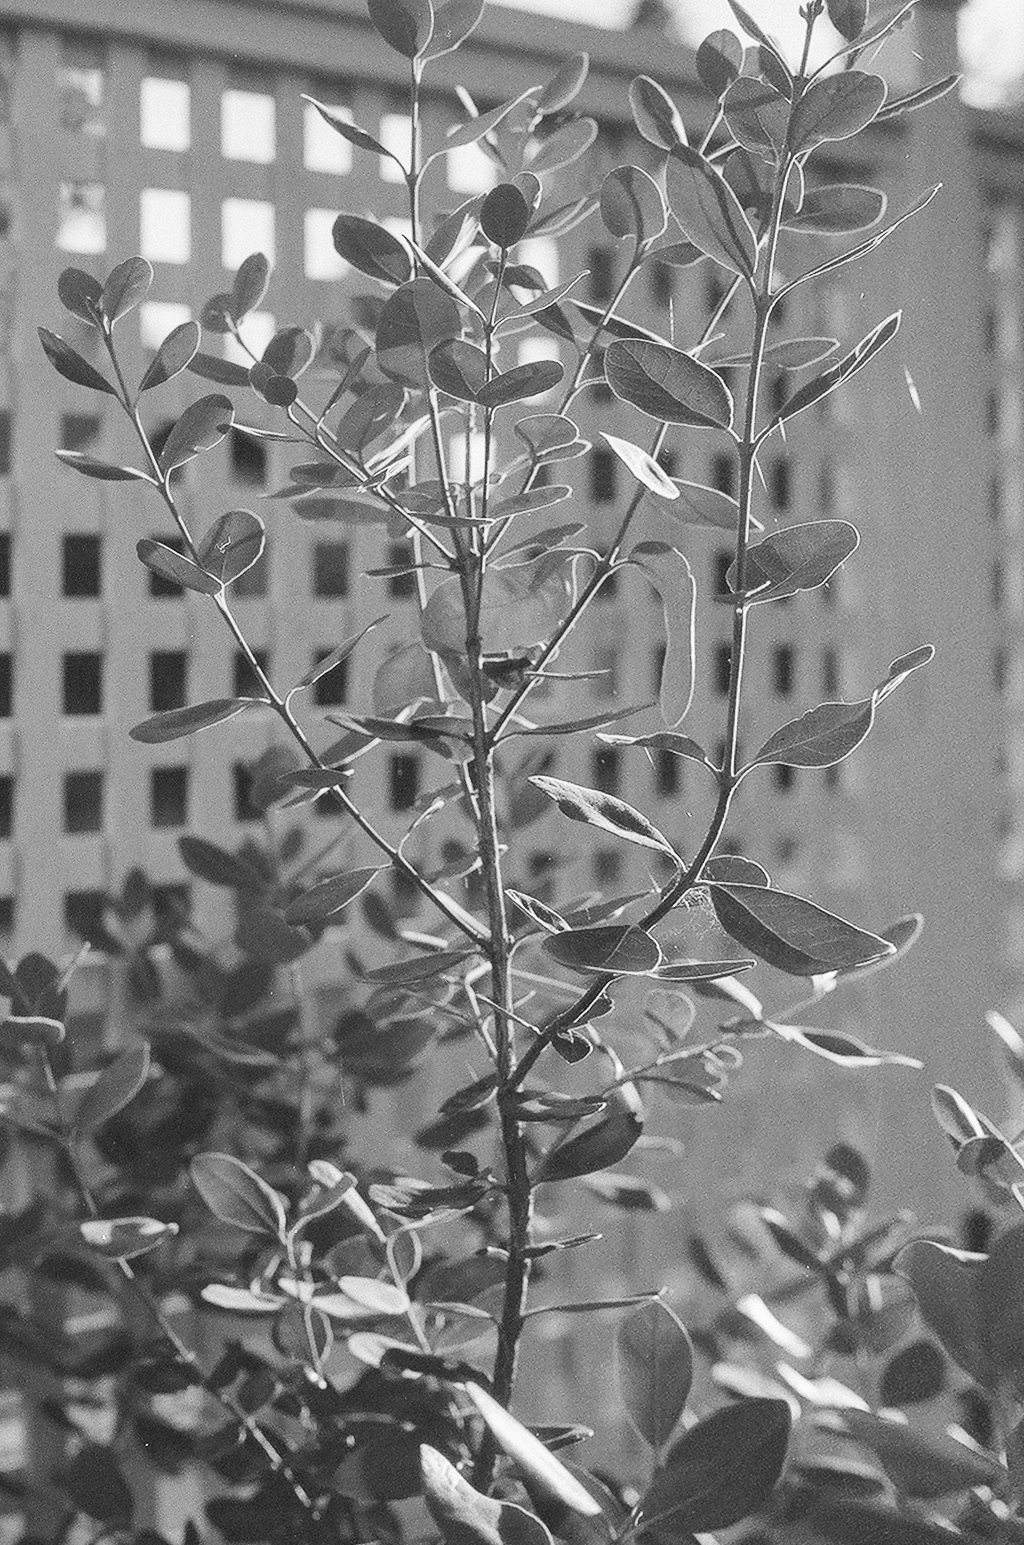 An up close black and white photo of a small plant in front of a white lattice fence.